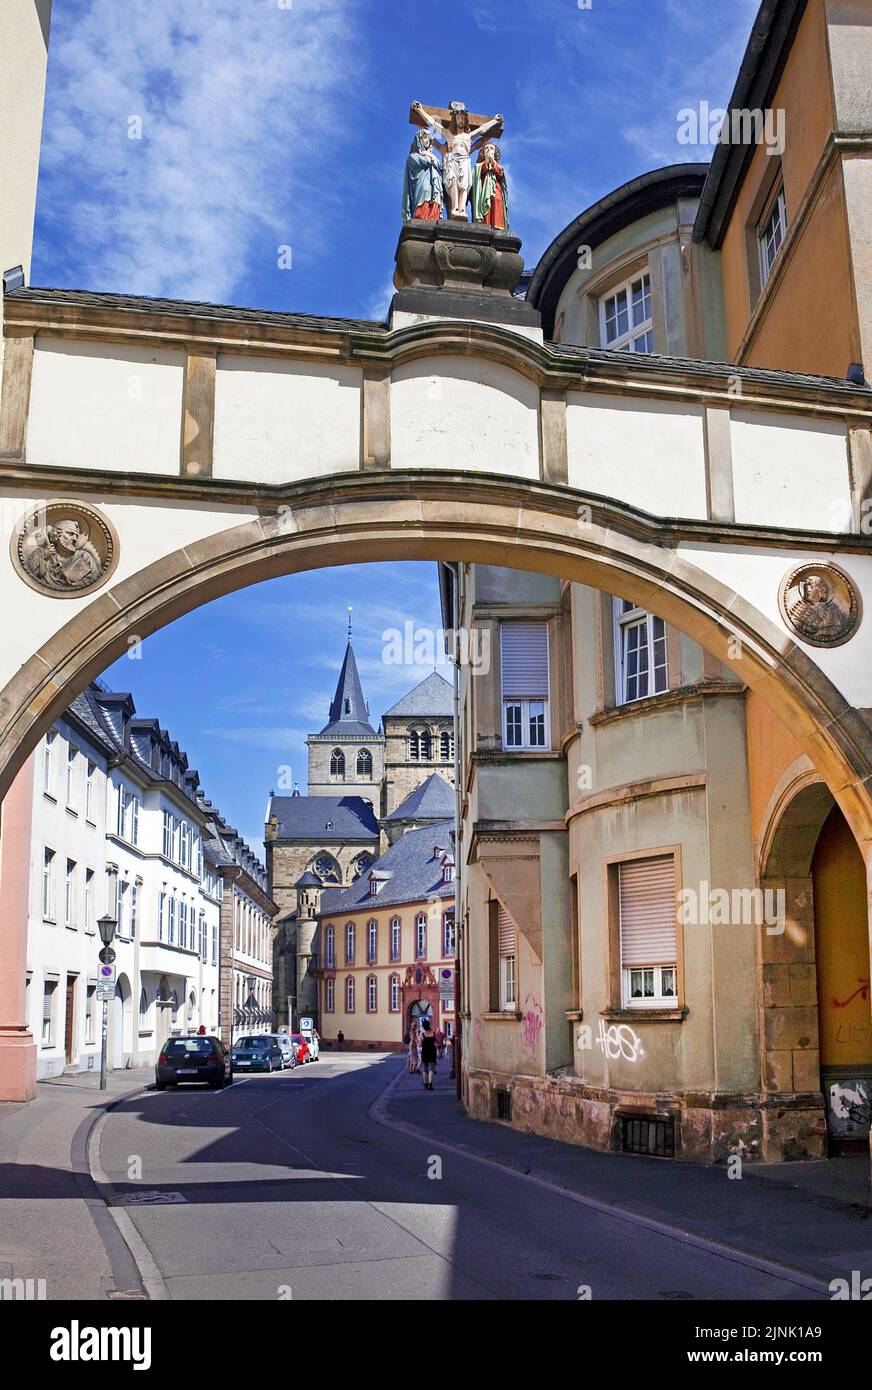 View from the Liebfrauen street to the Cathedral of Trier Saint Peter dome, Unesco World heritage site,Trier, Rhineland-Palatinate, Germany, Europe Stock Photo